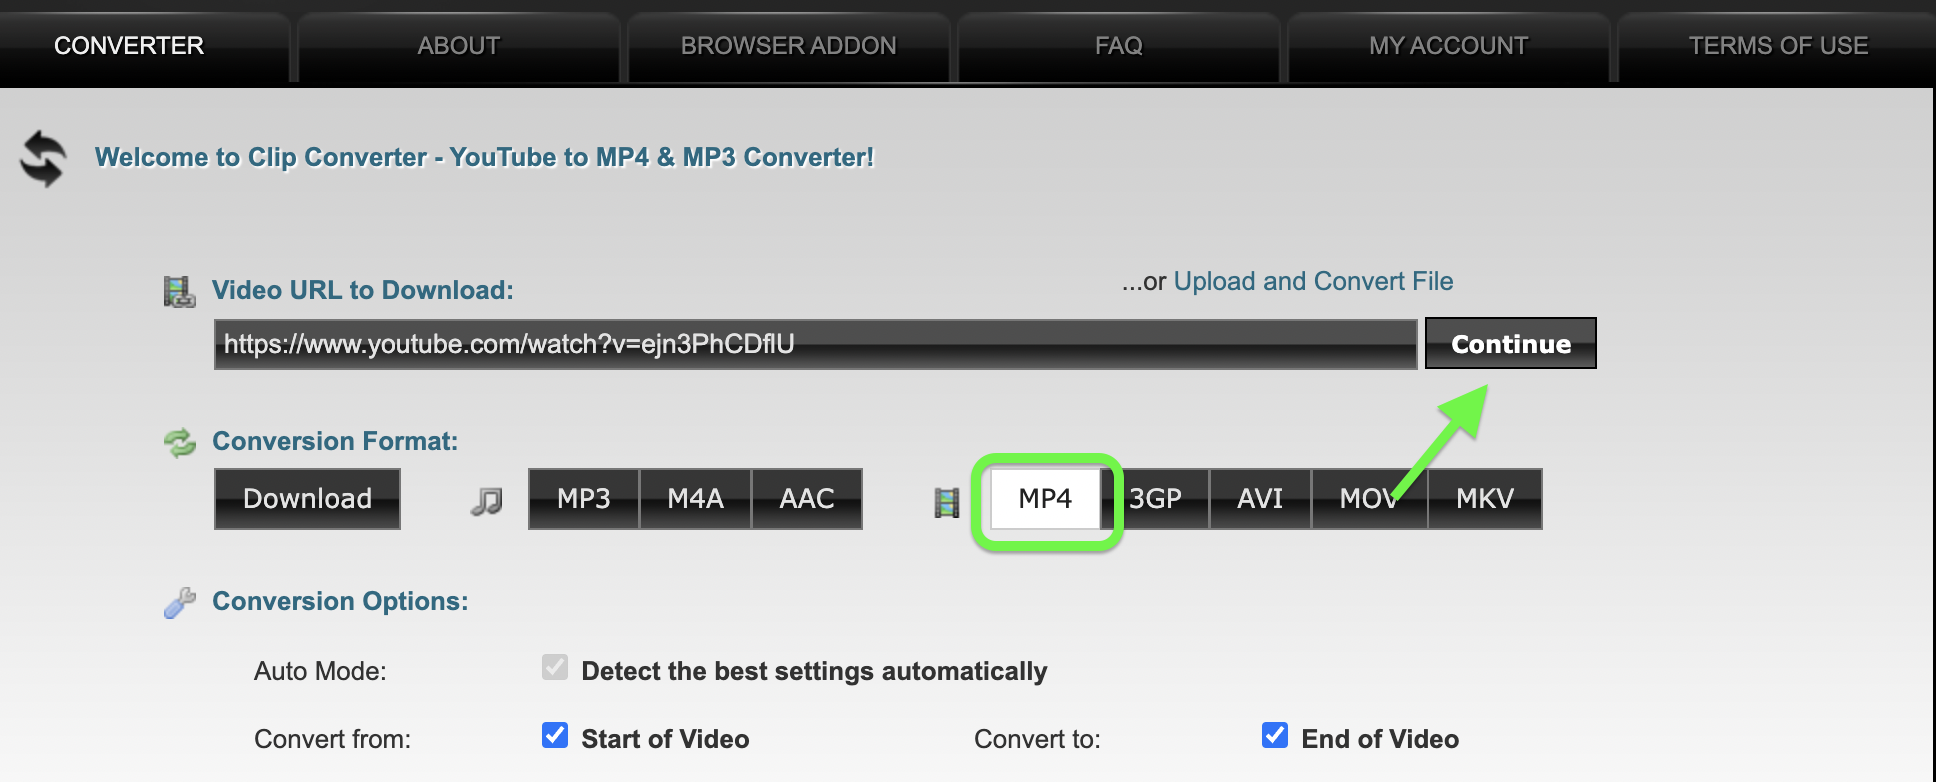 Select Mp4 format and click the Continue button;